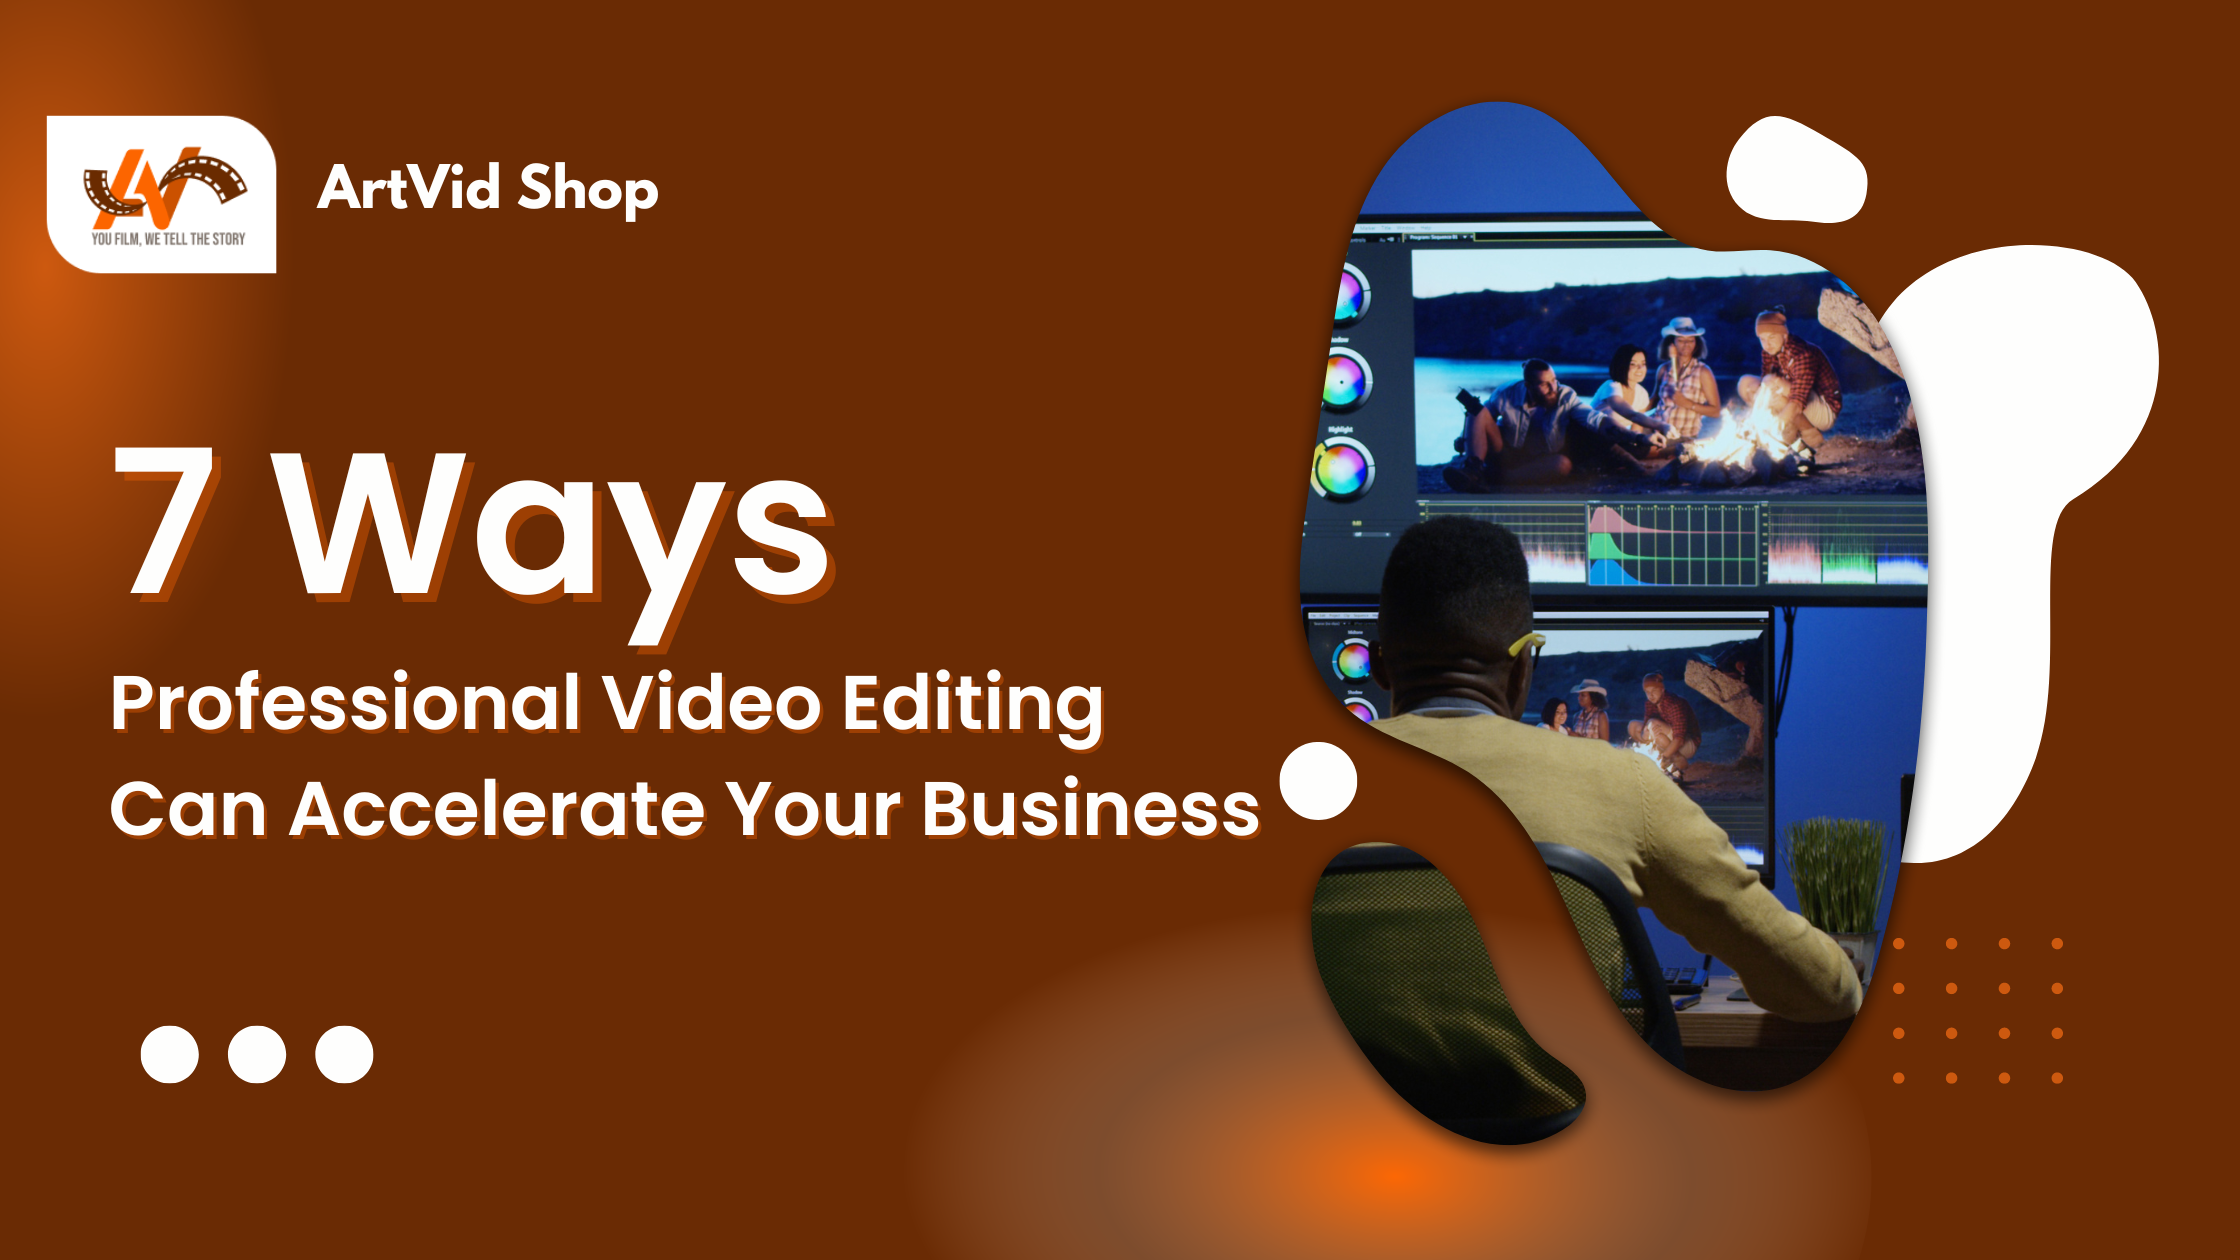 7 Ways Professional Video Editing Can Accelerate Your Business